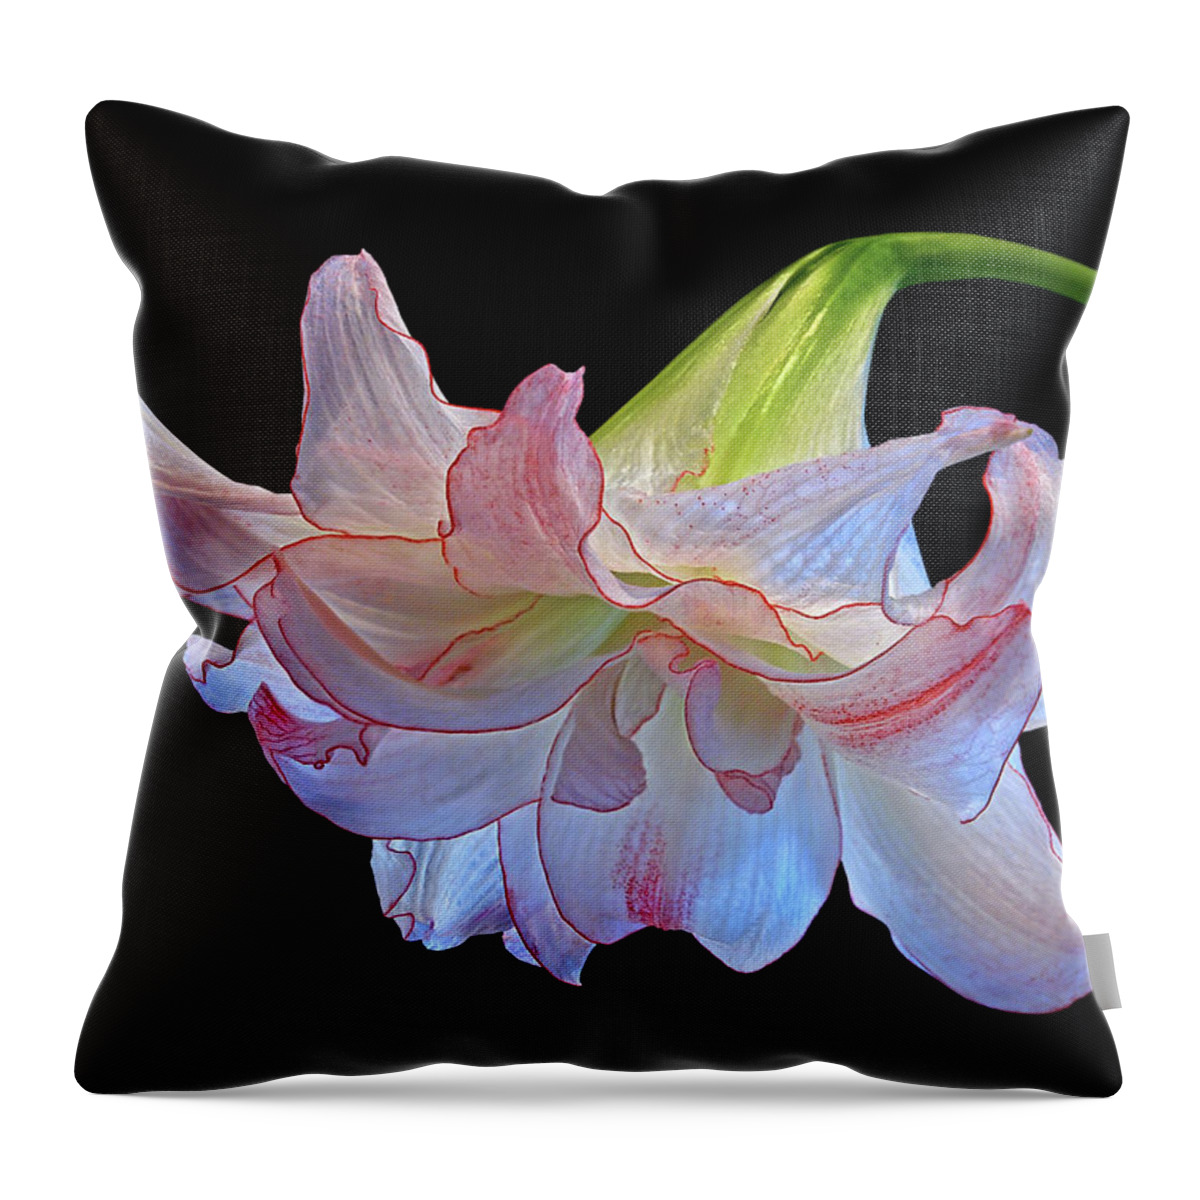 Amaryllis Throw Pillow featuring the photograph Pink And White Double Amaryllis on Black by Gill Billington